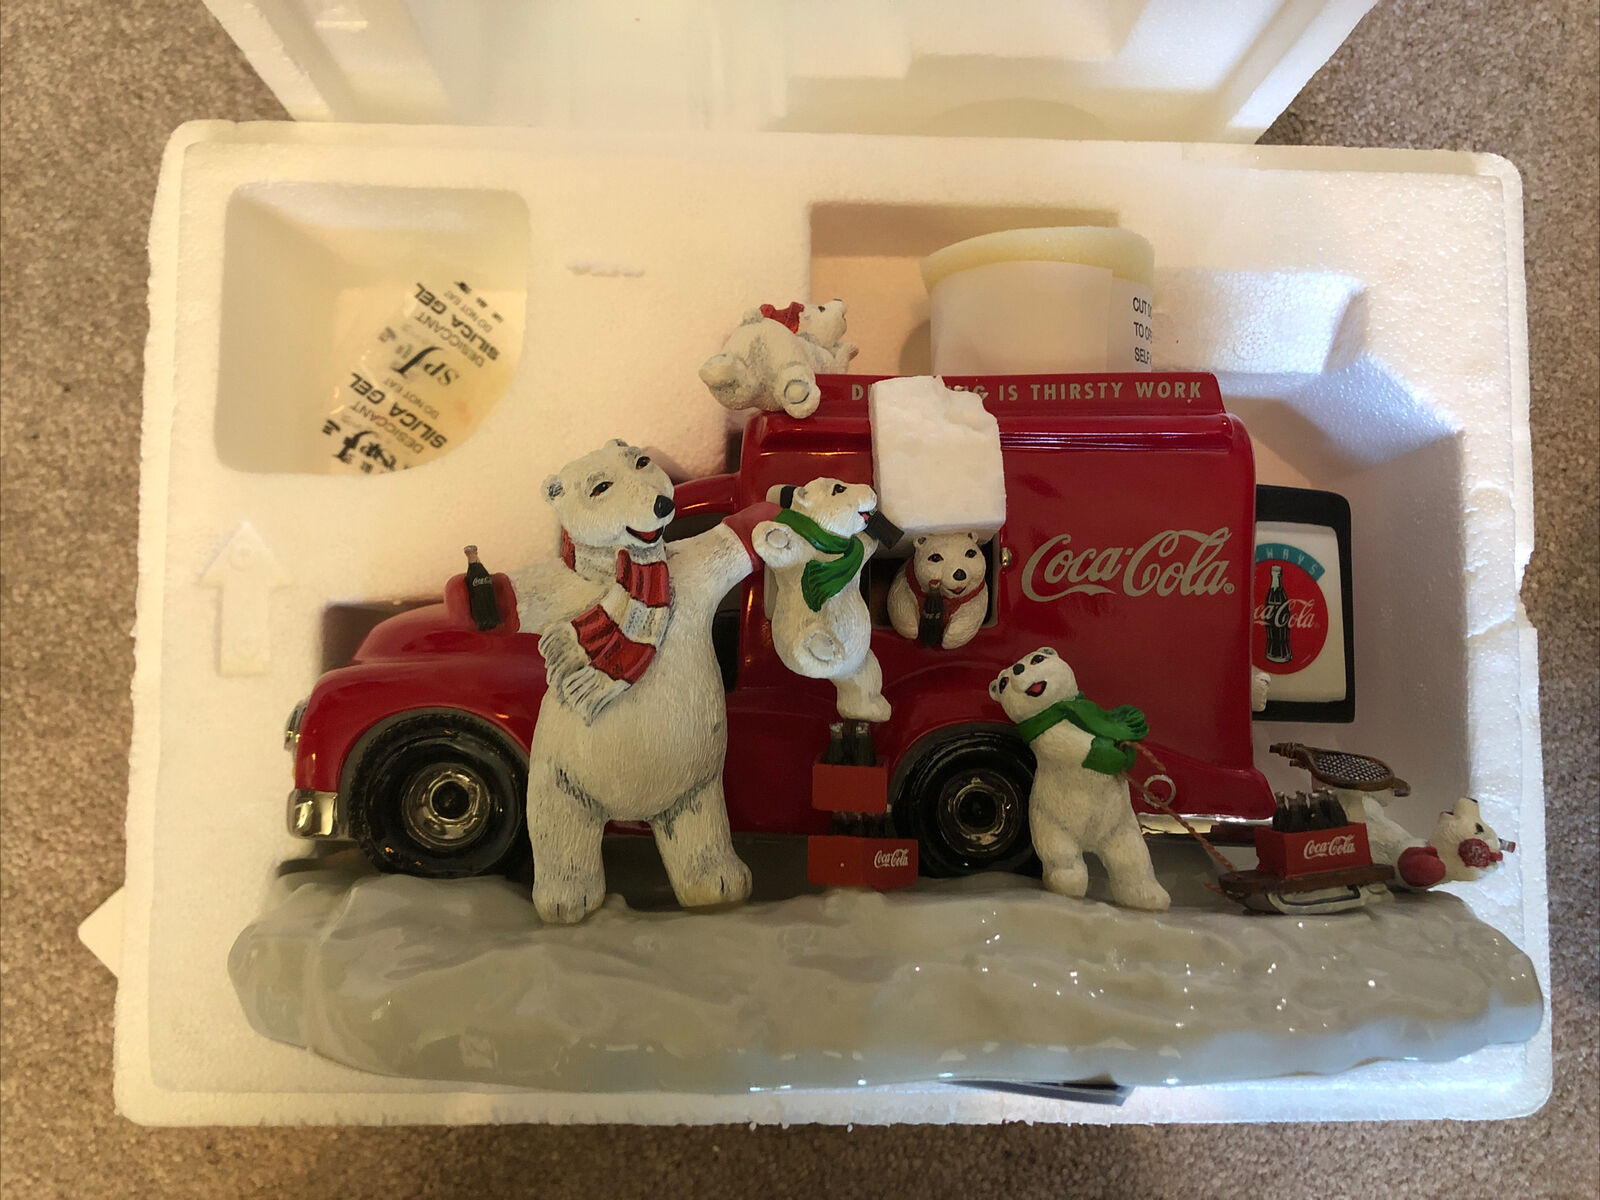 NEW 1998 FRANKLIN MINT COCA COLA ALWAYS WIND-UP MOTION MUSICAL SCULPTURE TRUCK 